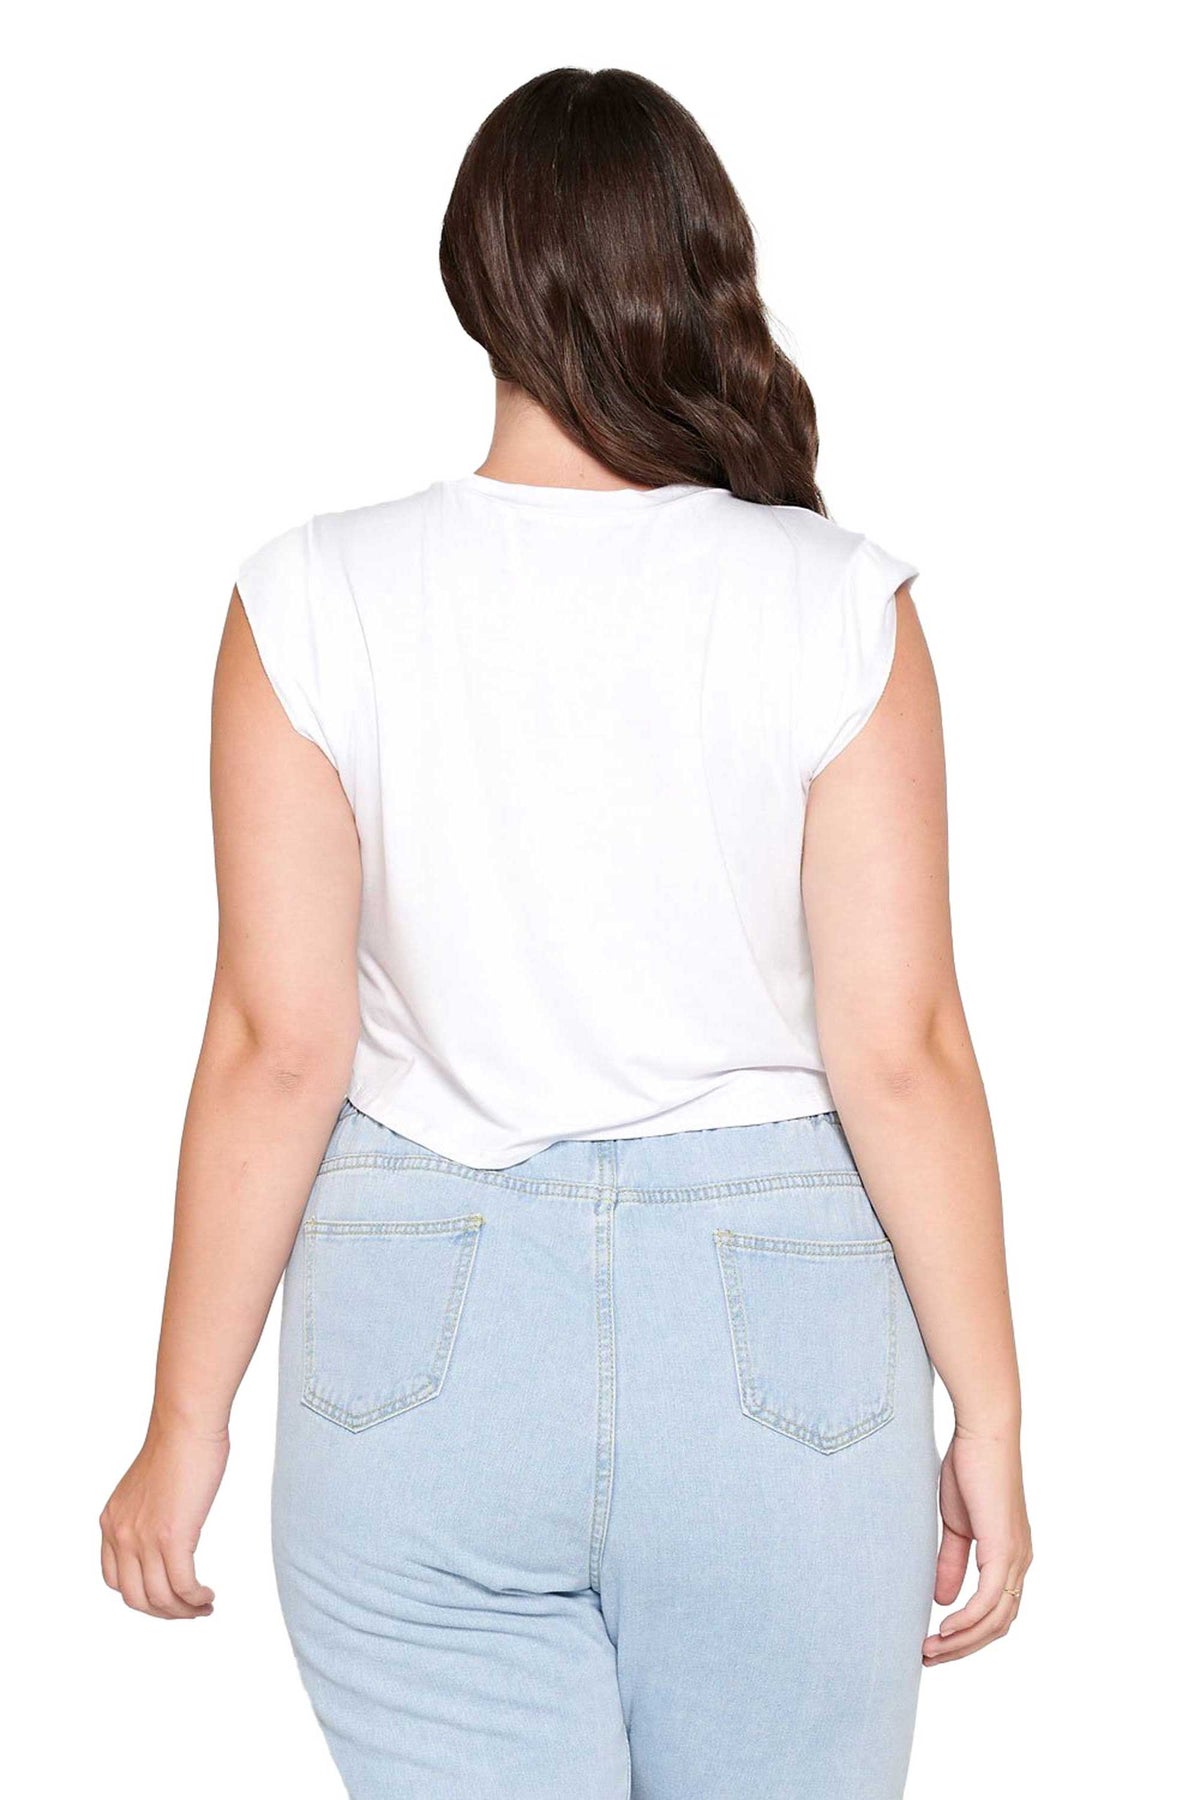 LIVD Apparel chic trendy plus size clothing white loose fitting crop top with mini cap sleeves